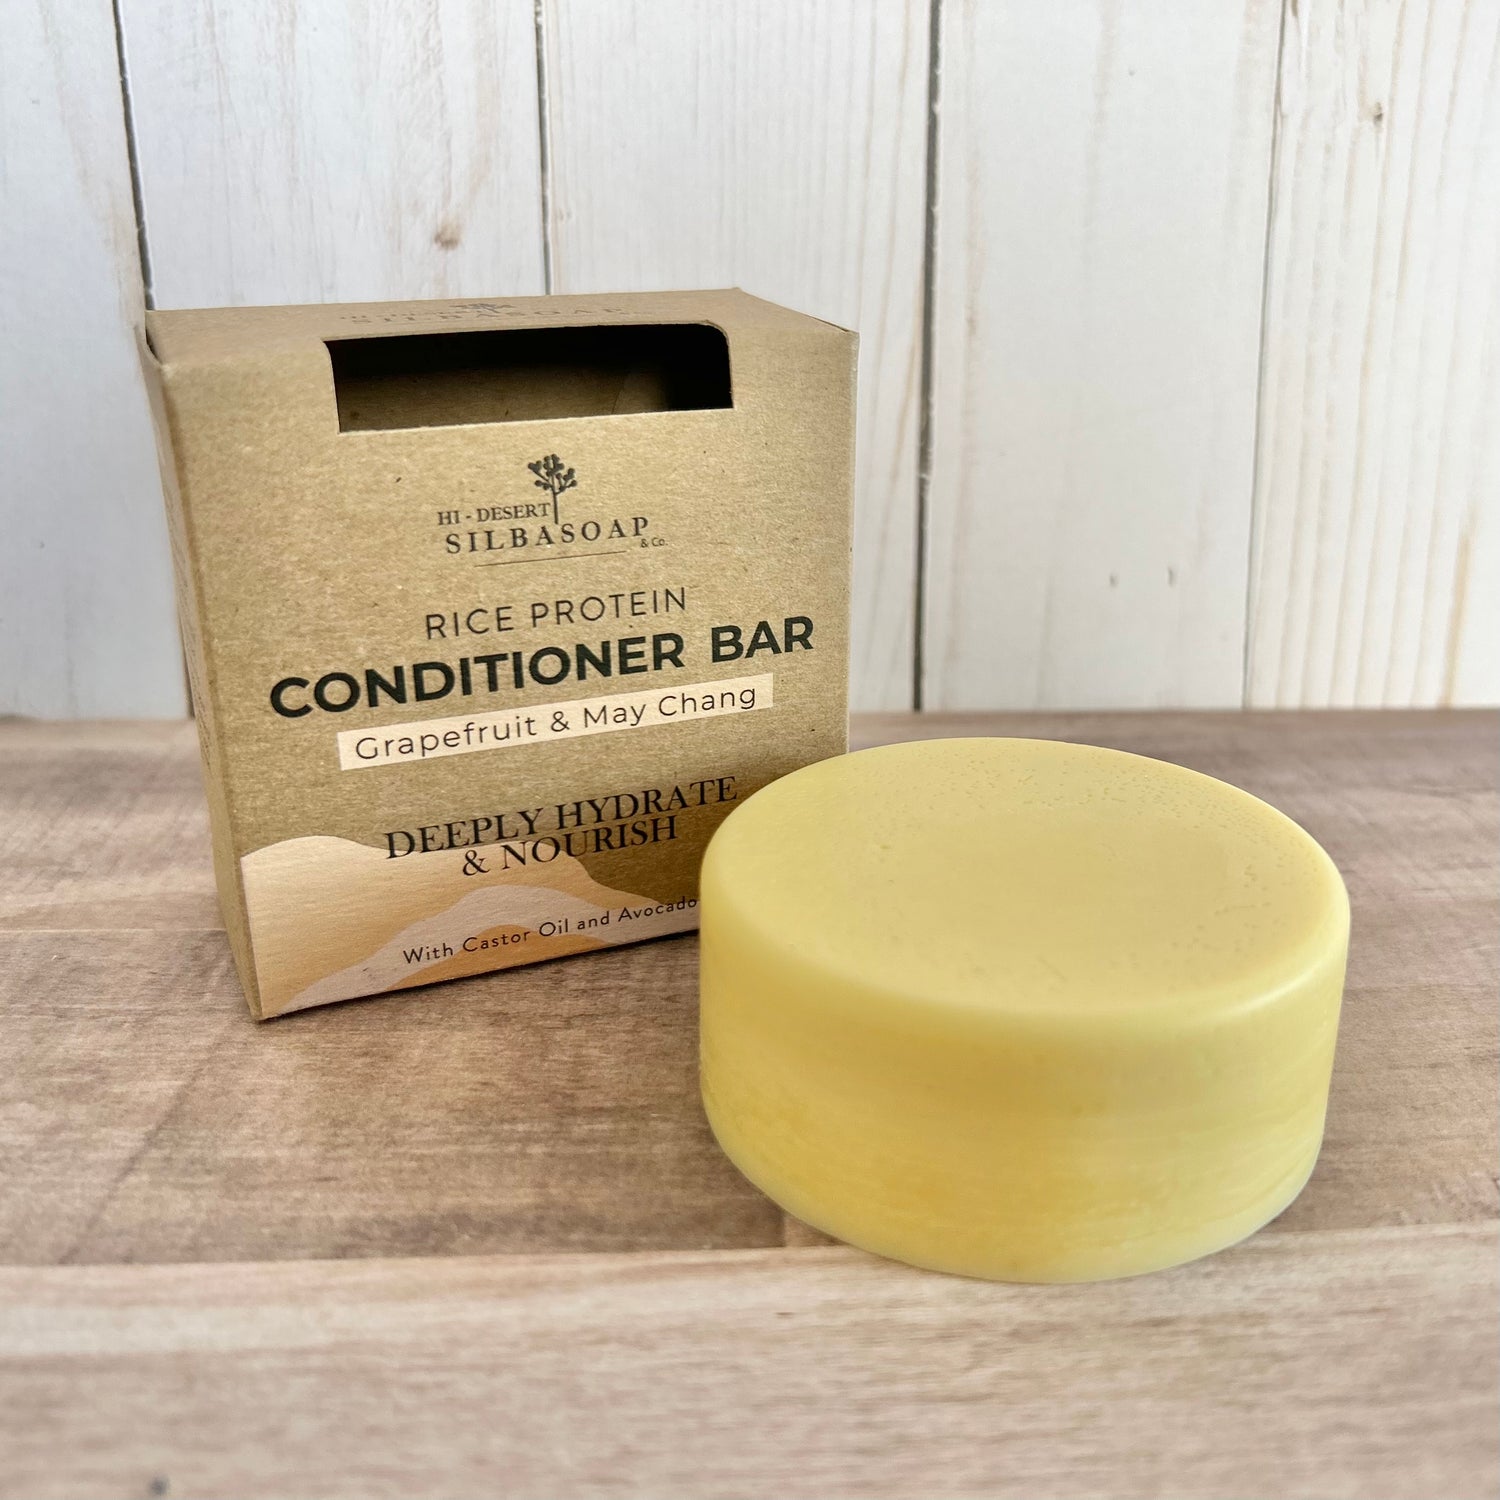 Conditioner Bar with box